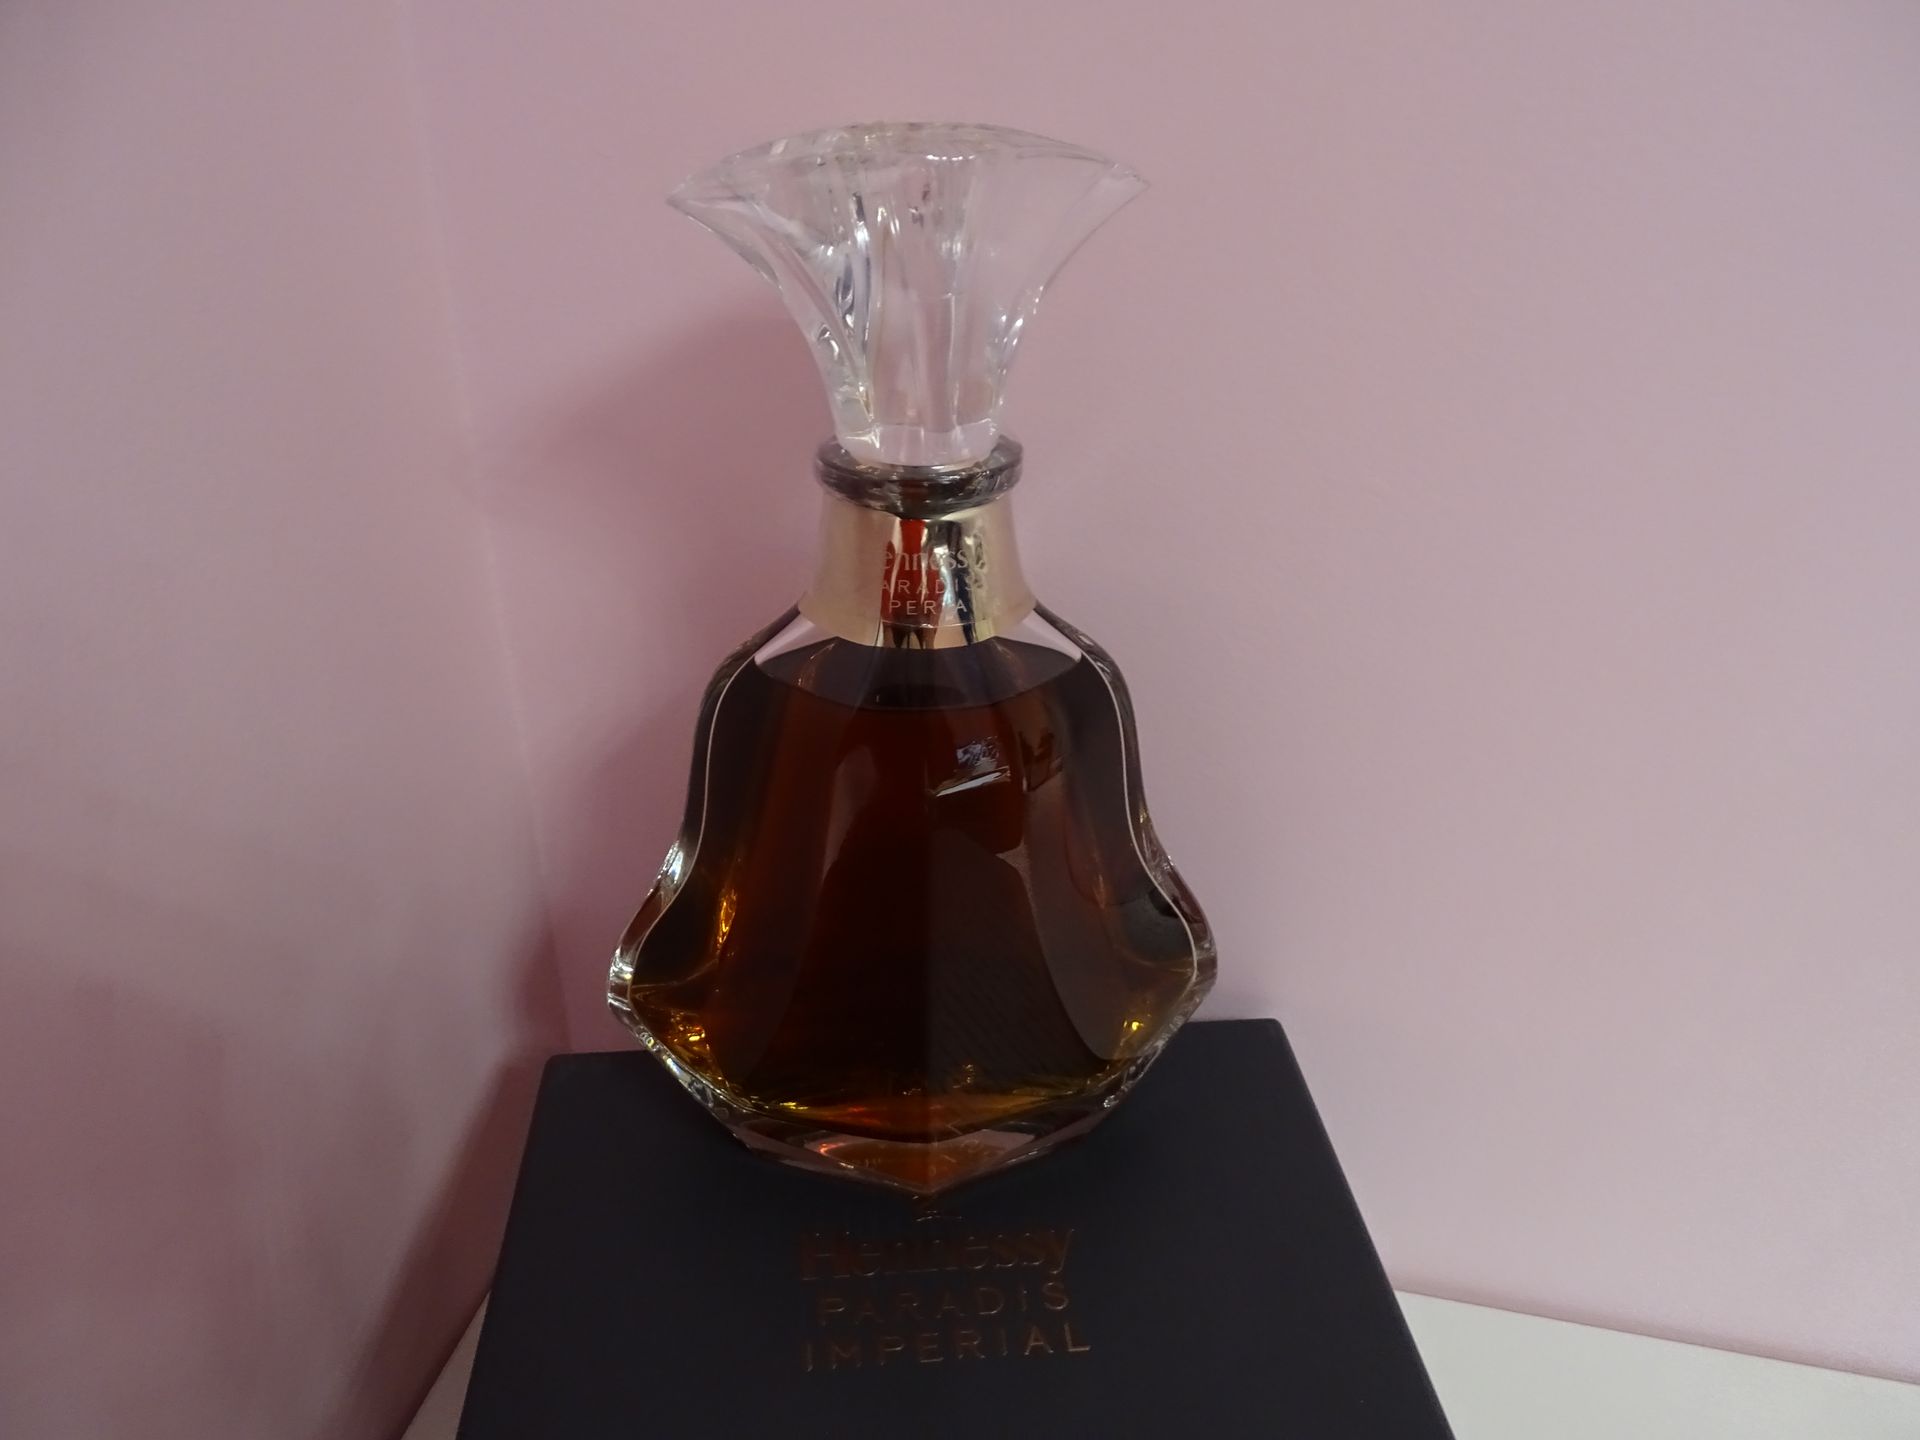 Null 1 bt of Hennesy Paradis Impérial cognac in its box